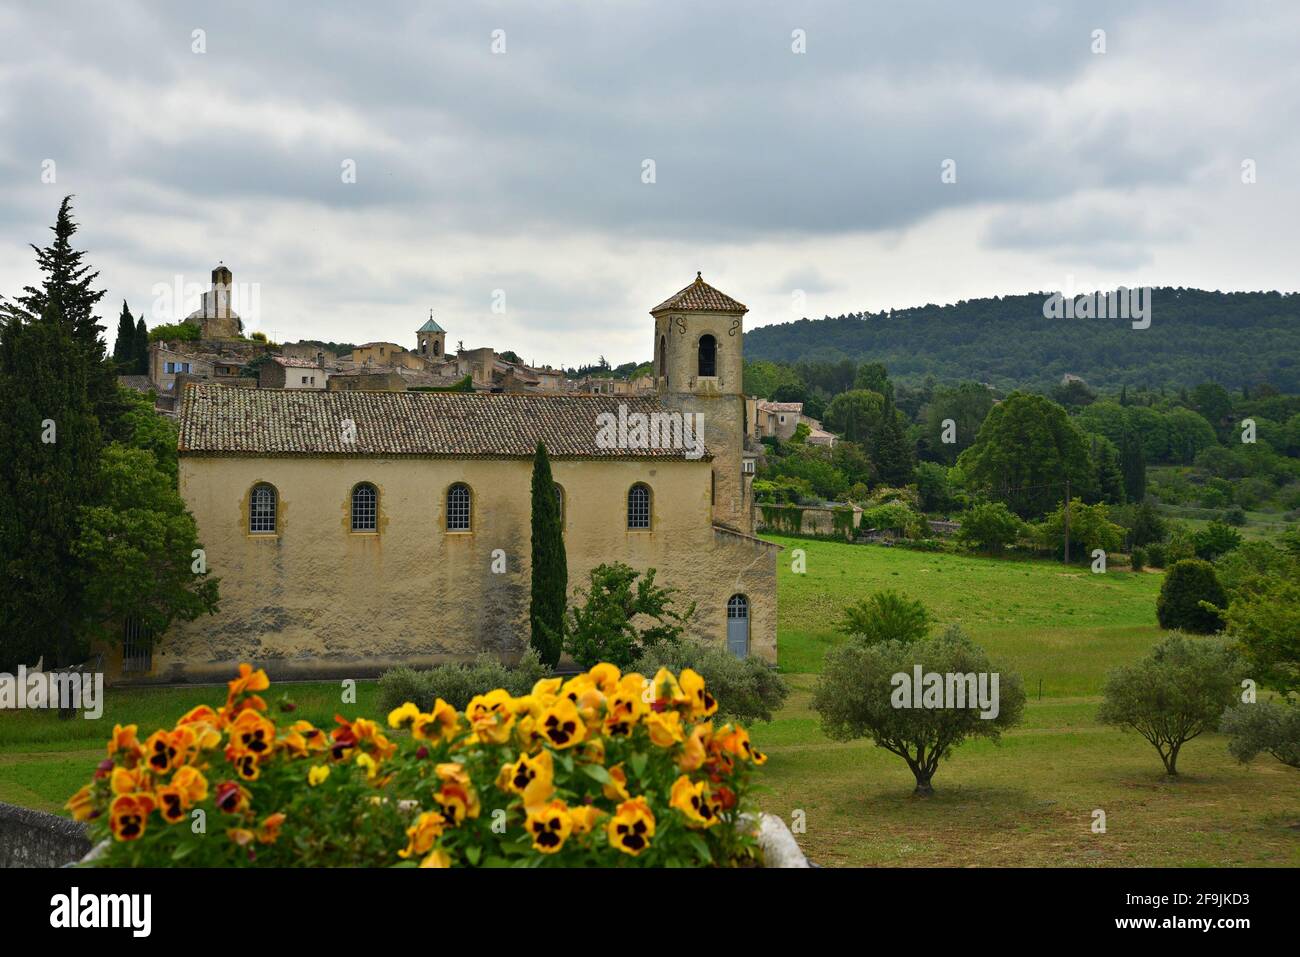 Landscape with scenic view of the Protestant Temple a landmark in the countryside of Lourmarin, Vaucluse Provence, France. Stock Photo